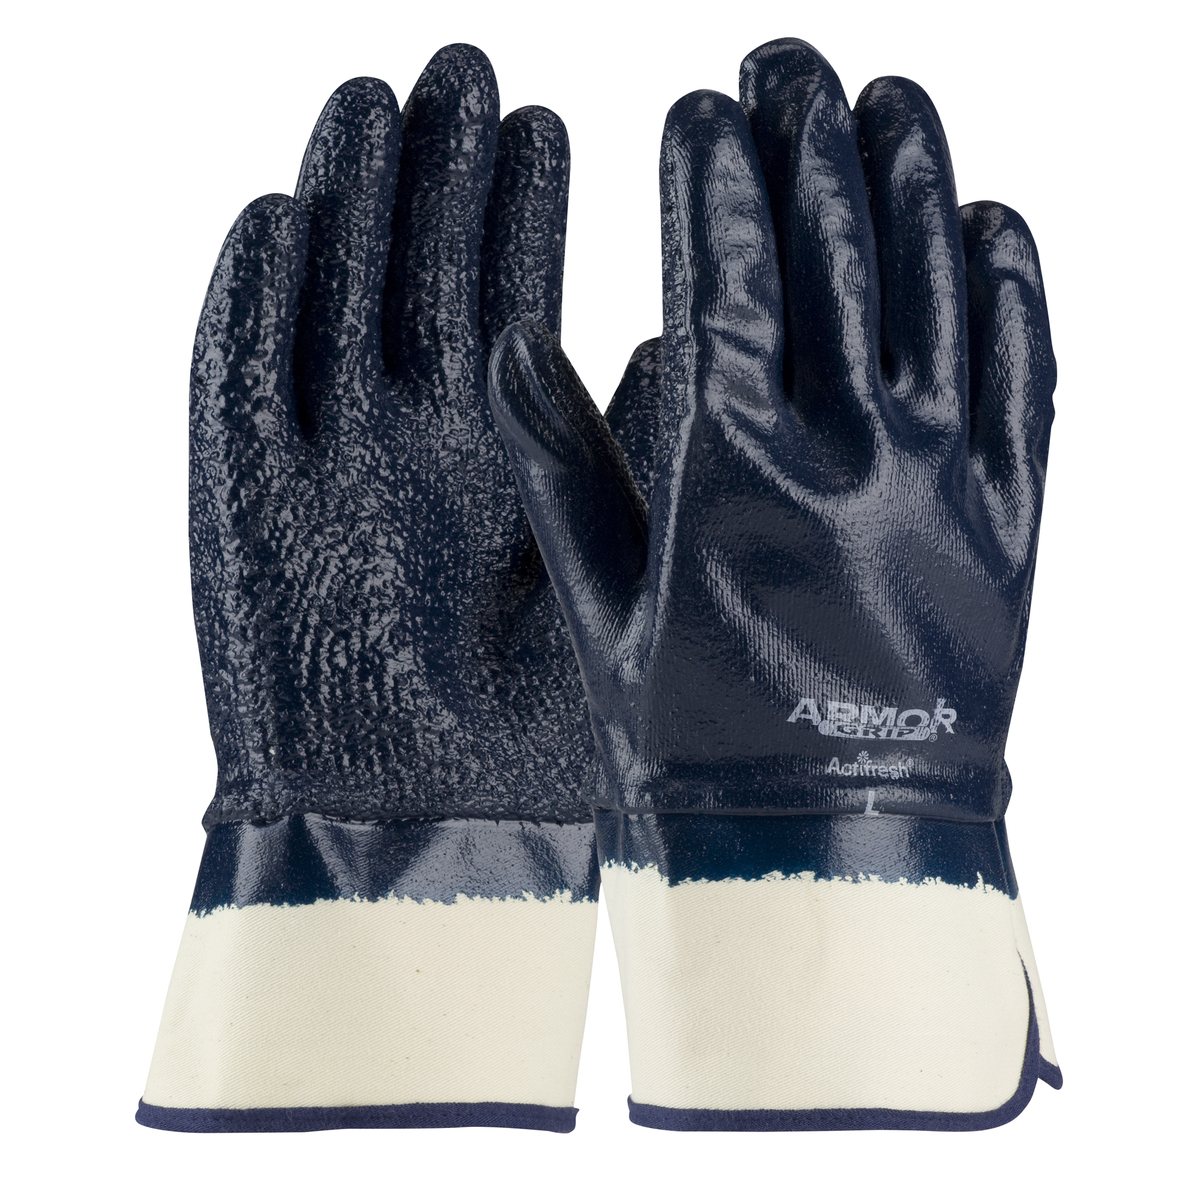 PIP® Large ArmorGrip® Heavy Weight Blue Nitrile Full Coated Work Gloves With Cotton Liner And Safety Cuff